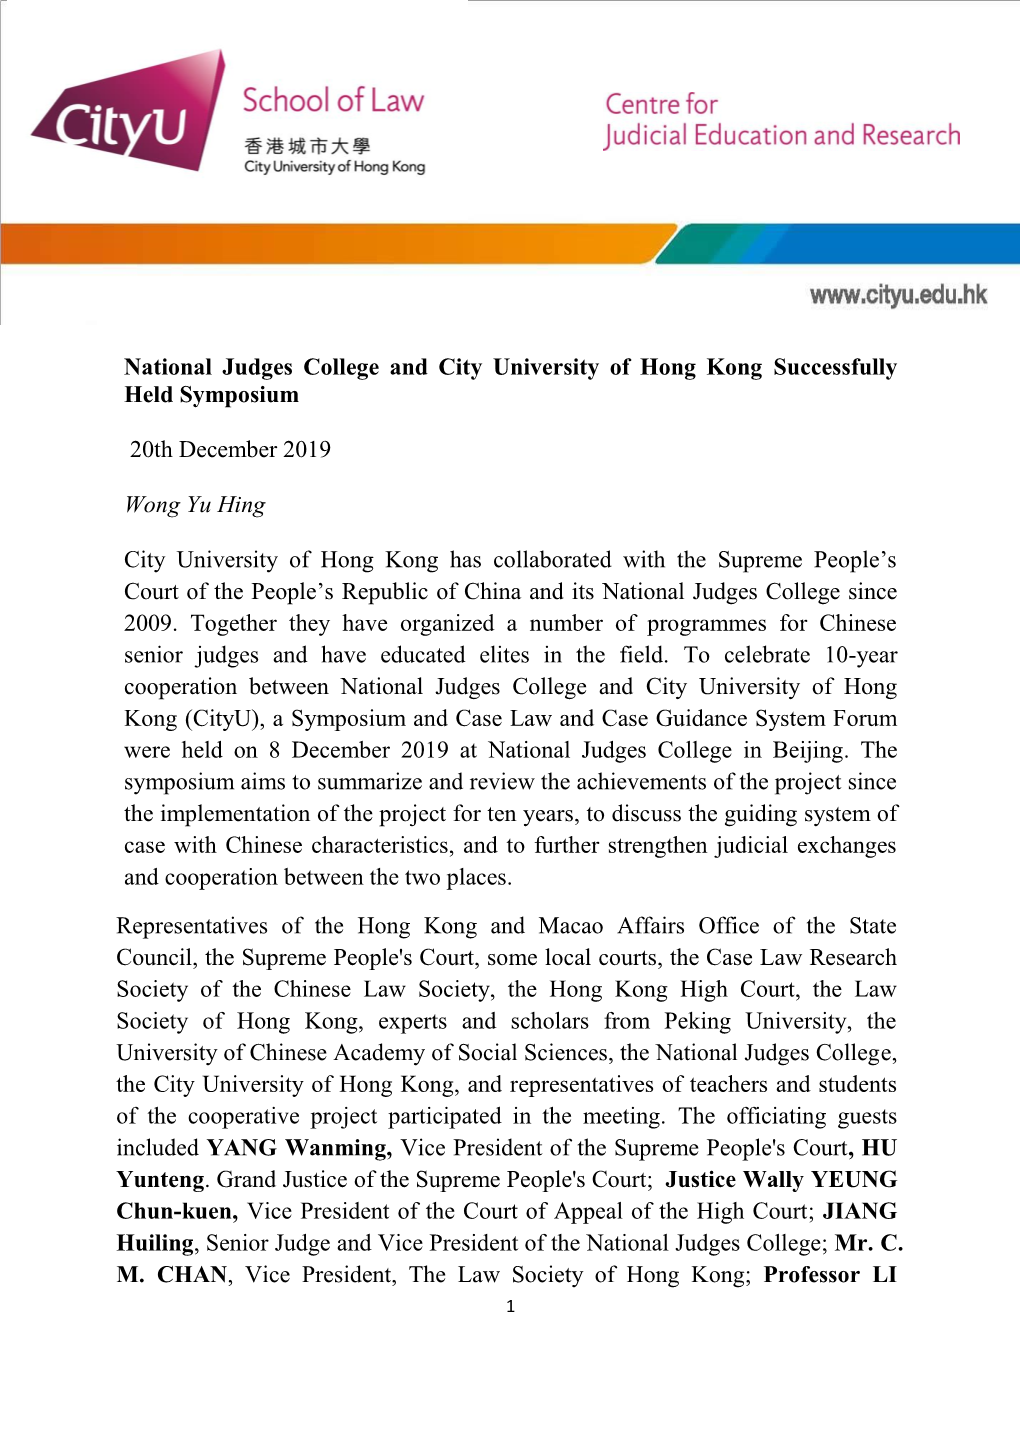 National Judges College and City University of Hong Kong Successfully Held Symposium